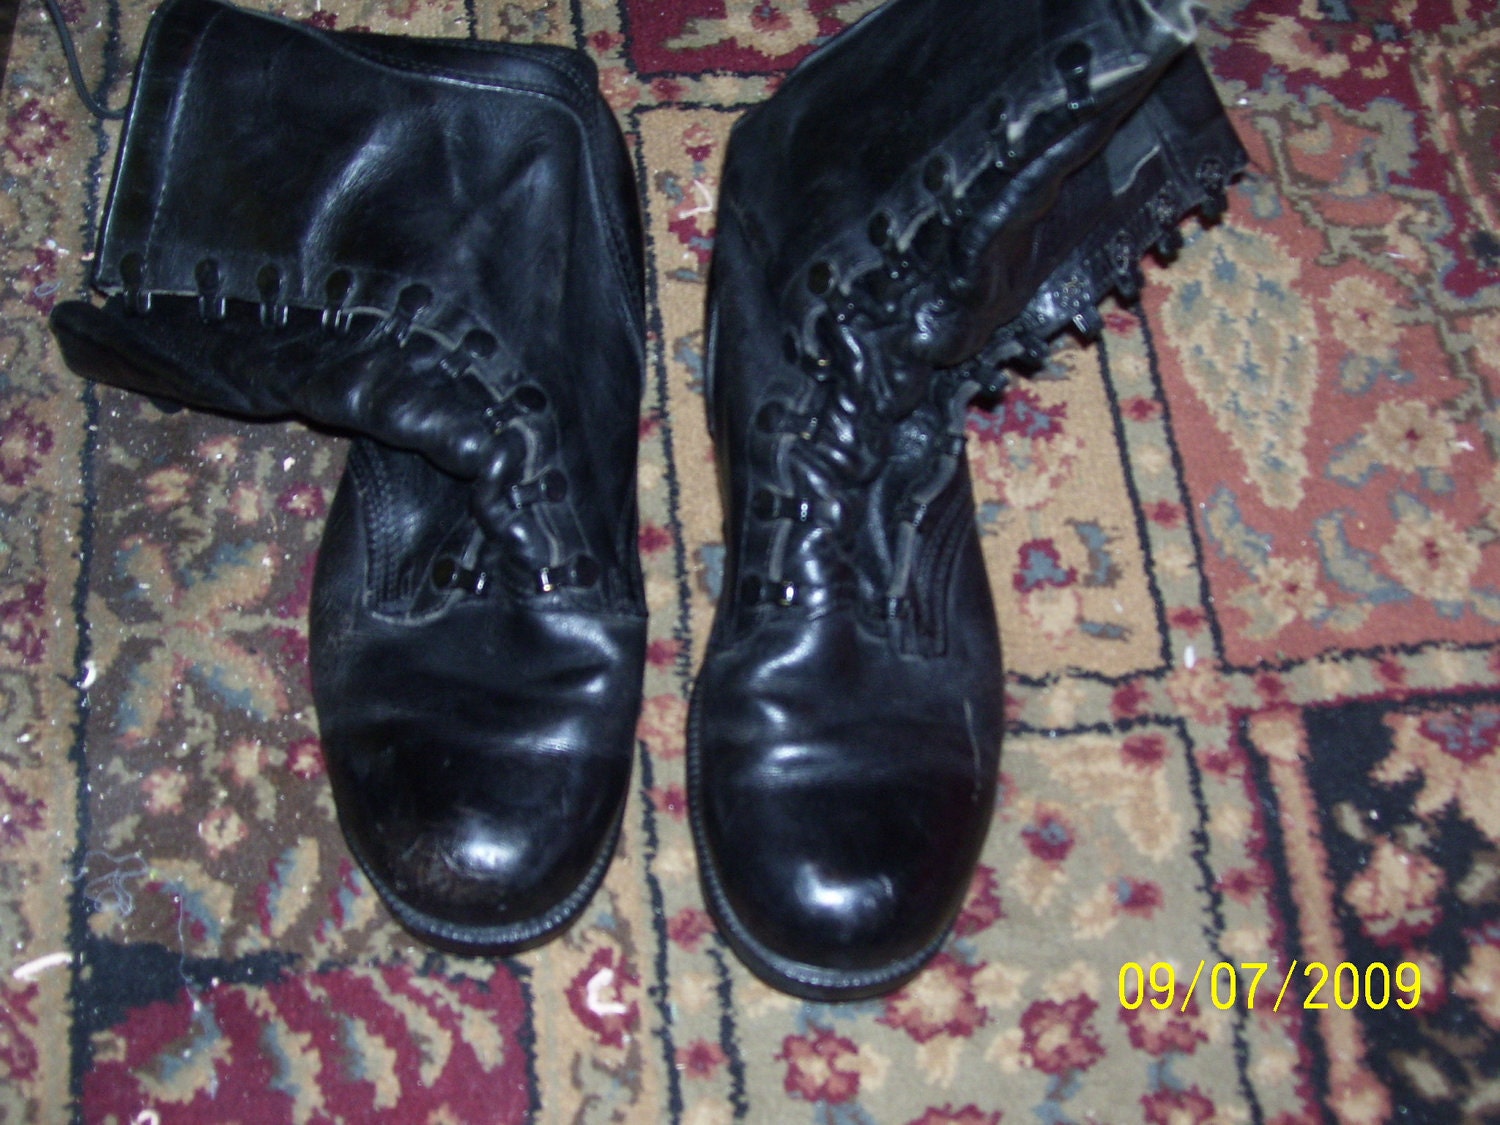 Punk Skinhead Military Combat Boots 7W by GothBlister on Etsy